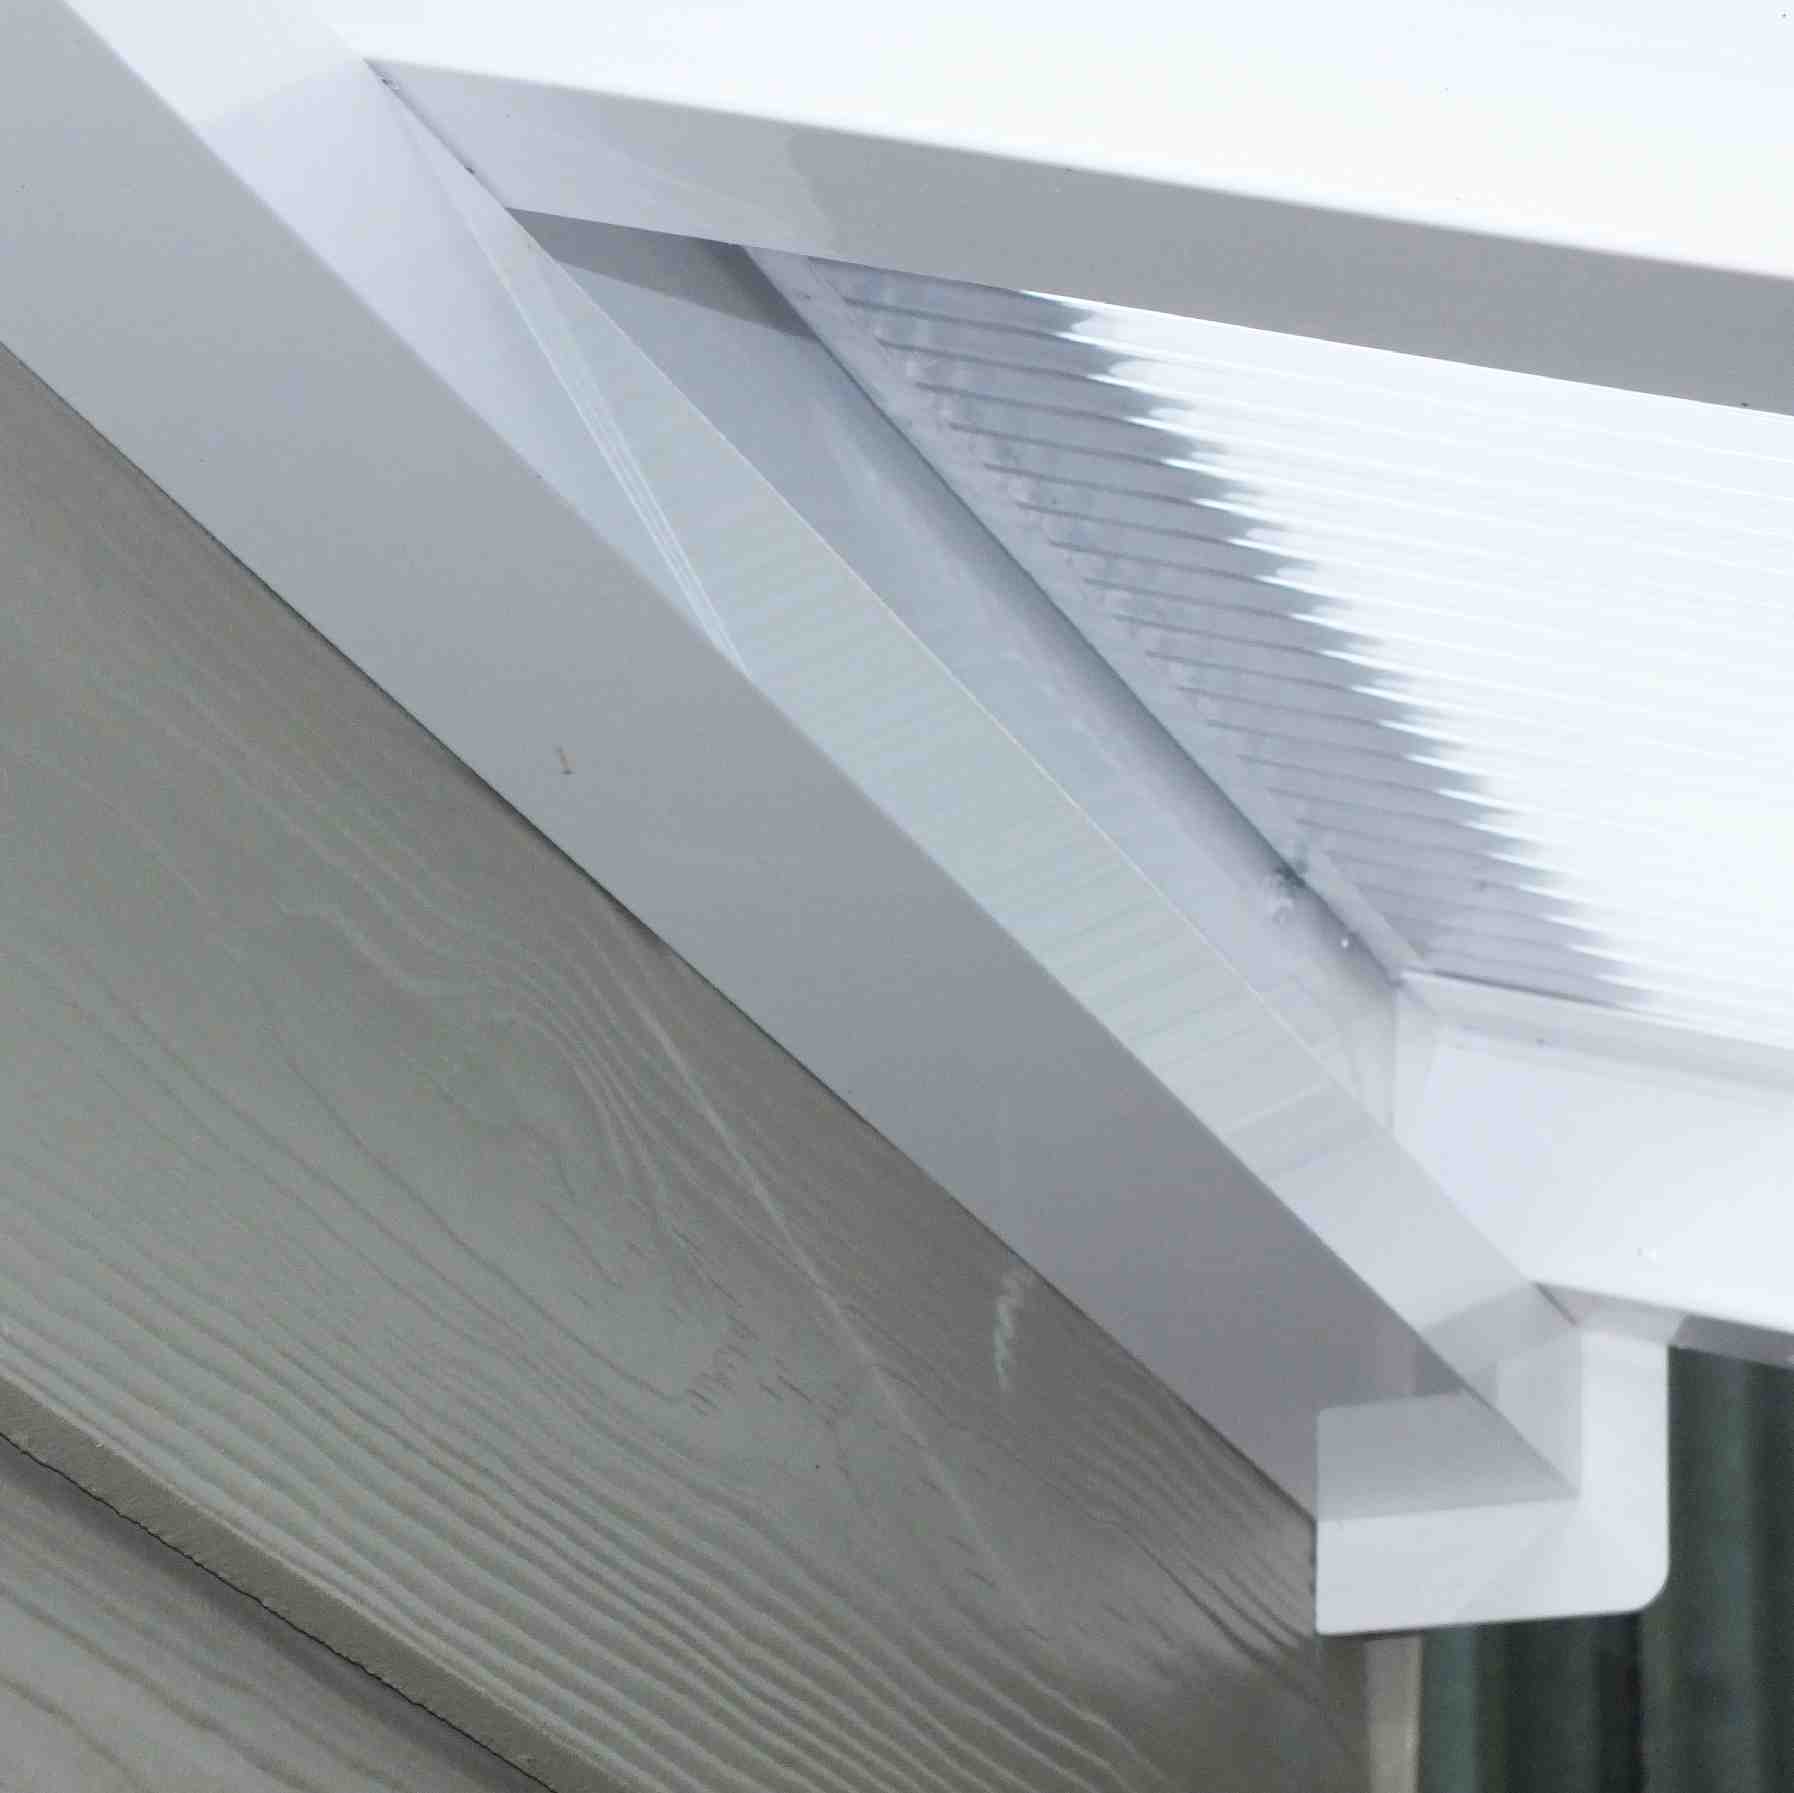 Great deals on Omega Verandah White with 16mm Polycarbonate Glazing - 7.4m (W) x 4.5m (P), (4) Supporting Posts